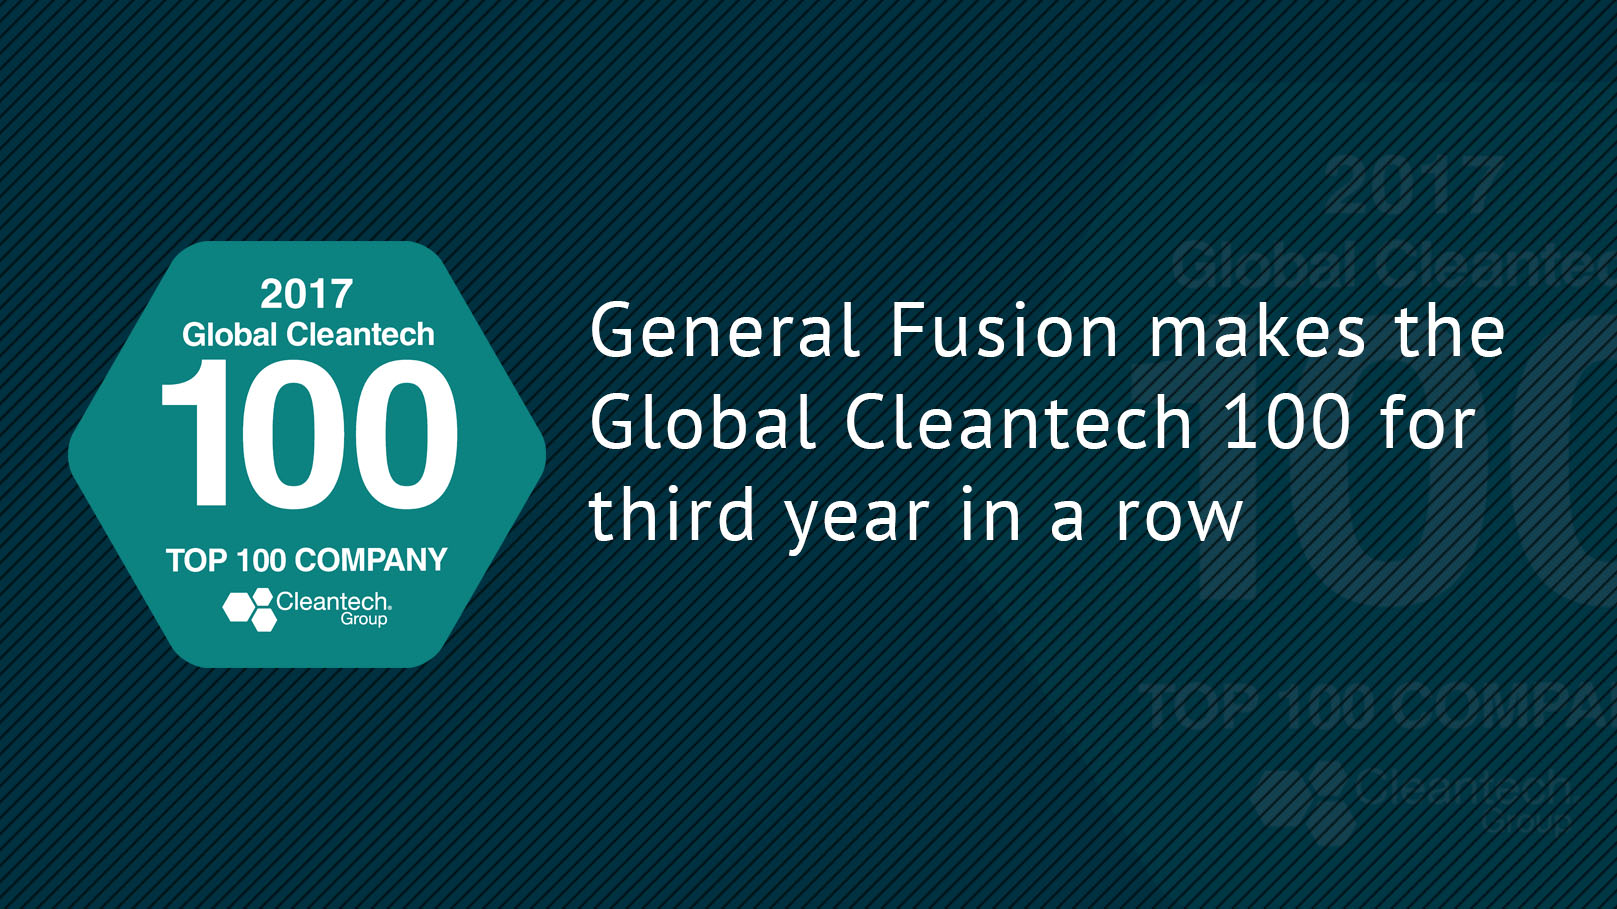 For third year in a row, General Fusion makes the Global Cleantech 100